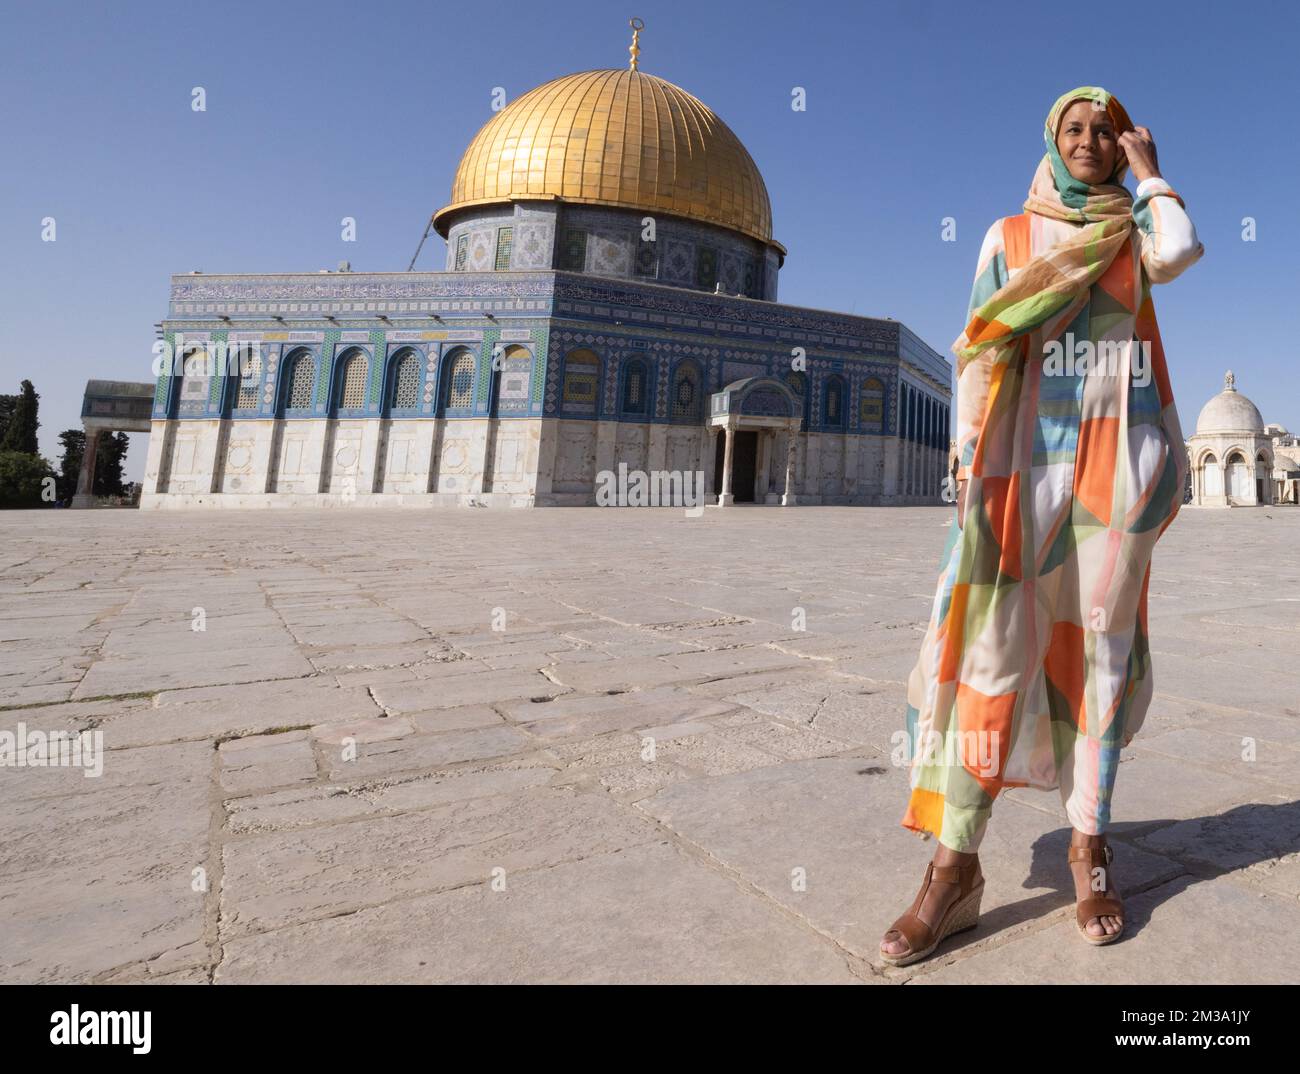 Minister for Development Cooperation Meryame Kitir pictured in front of the Dome of the Rock mosque at the al-Aqsa mosque compound in the Old City of Jerusalem during a visit to the Palestinian Territories, Thursday 12 May 2022. Kitir will visit Palestine from 09 to 13 May. There she draws attention to the need for high-quality protection for Palestinians who have to live under the occupation and wants to give Palestinian young people and women a perspective on a more promising future. During her visit to the occupied Palestinian territories, Minister Kitir will reinforce her approach by launc Stock Photo